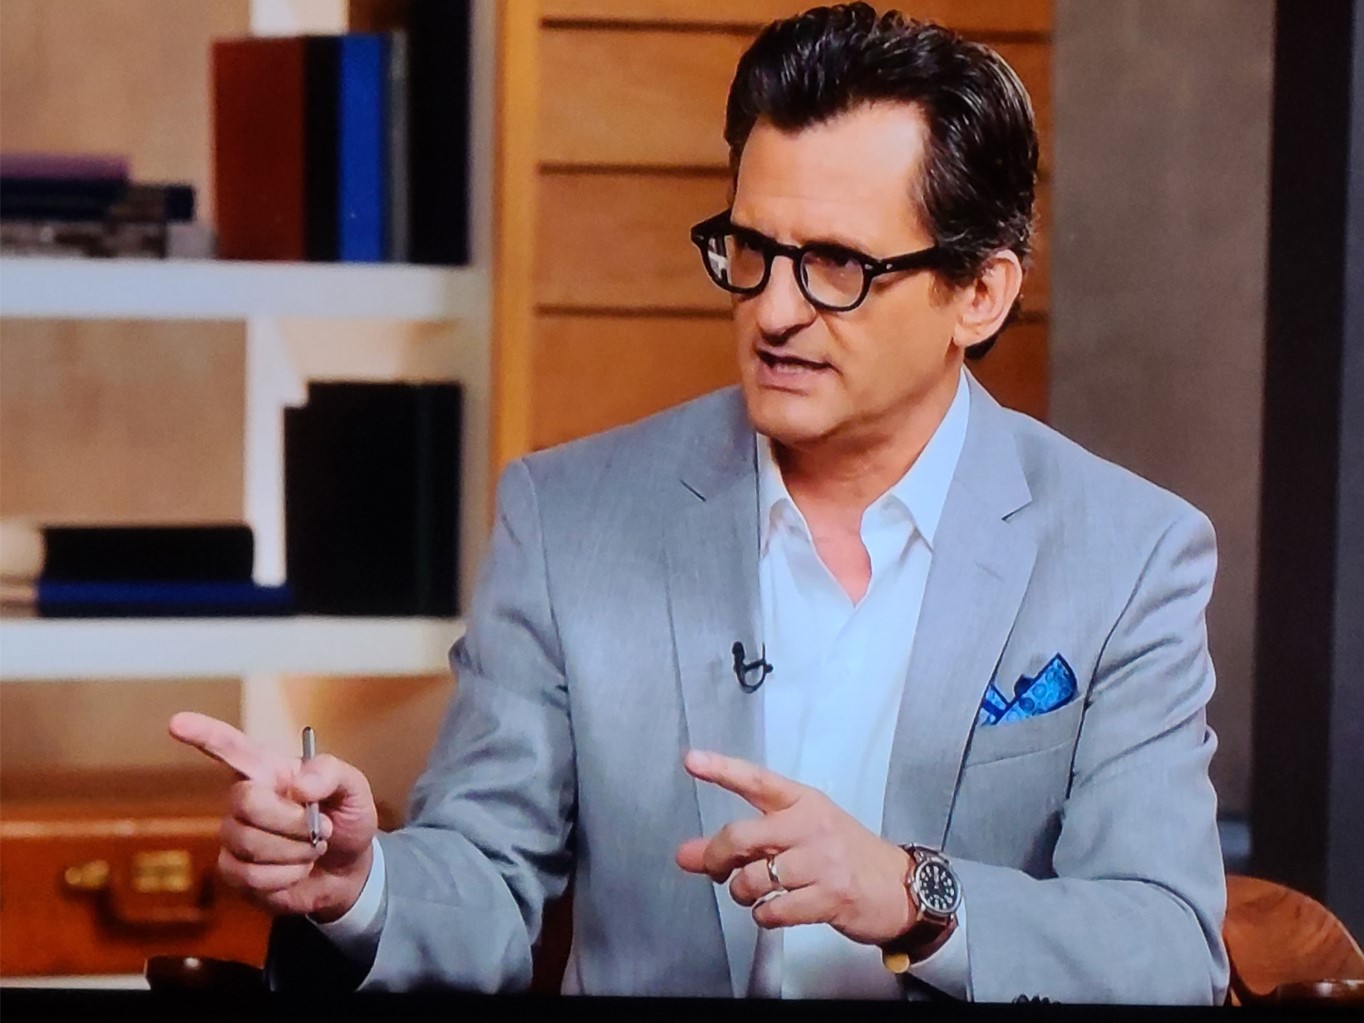 Ben Mankiewicz Interviews Lucille Ball—A What If - Classic Couple